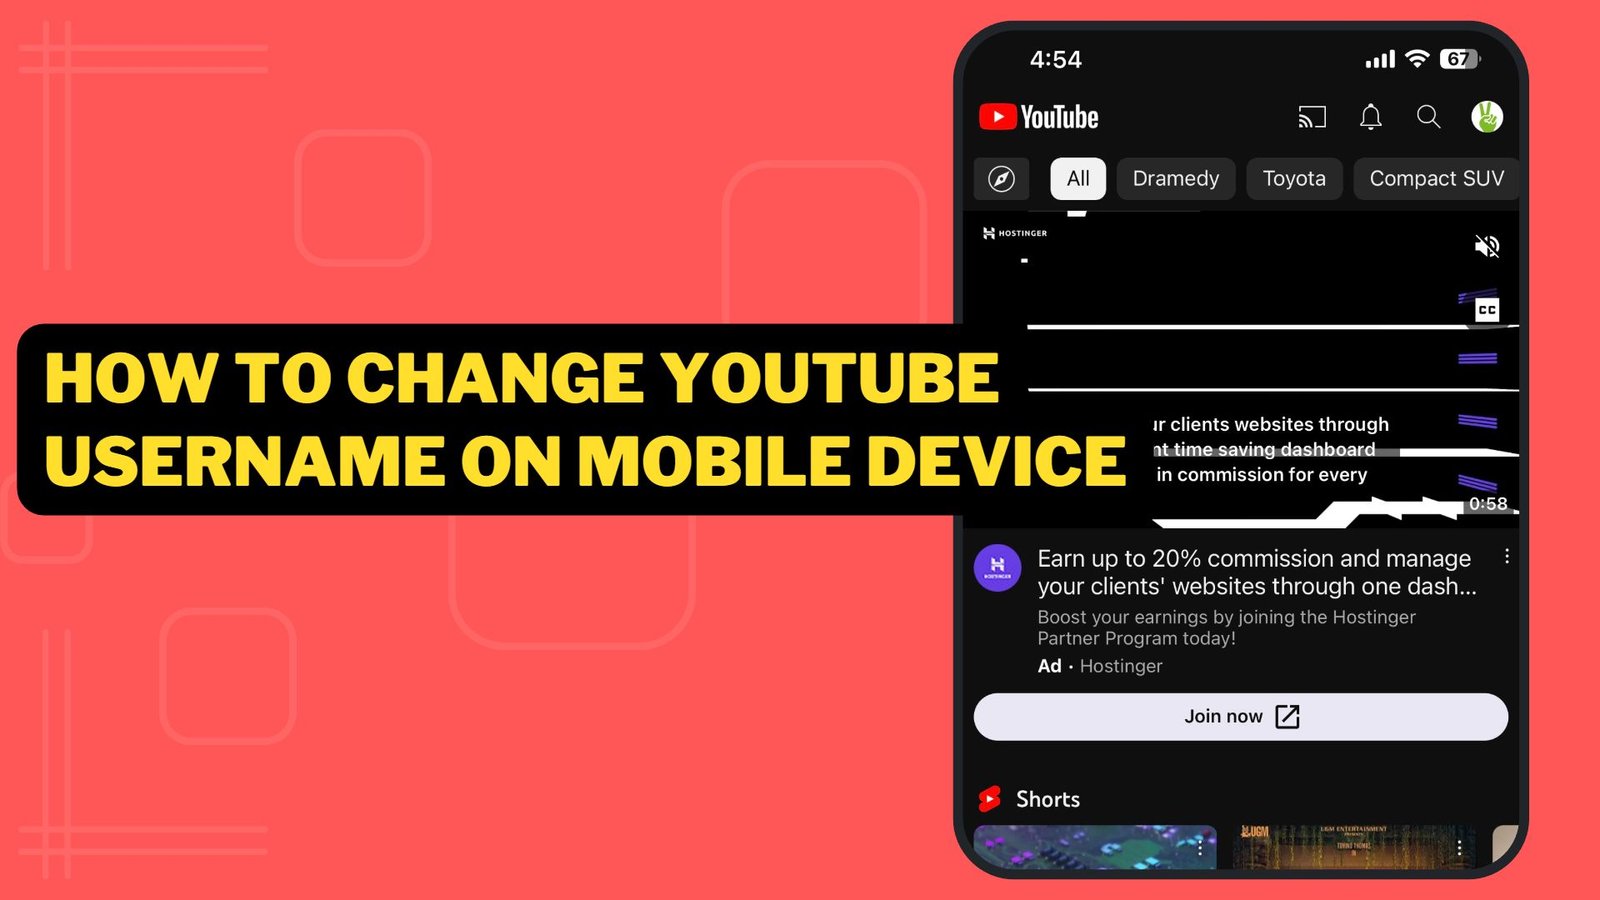 How To Change YouTube Username On Mobile Device